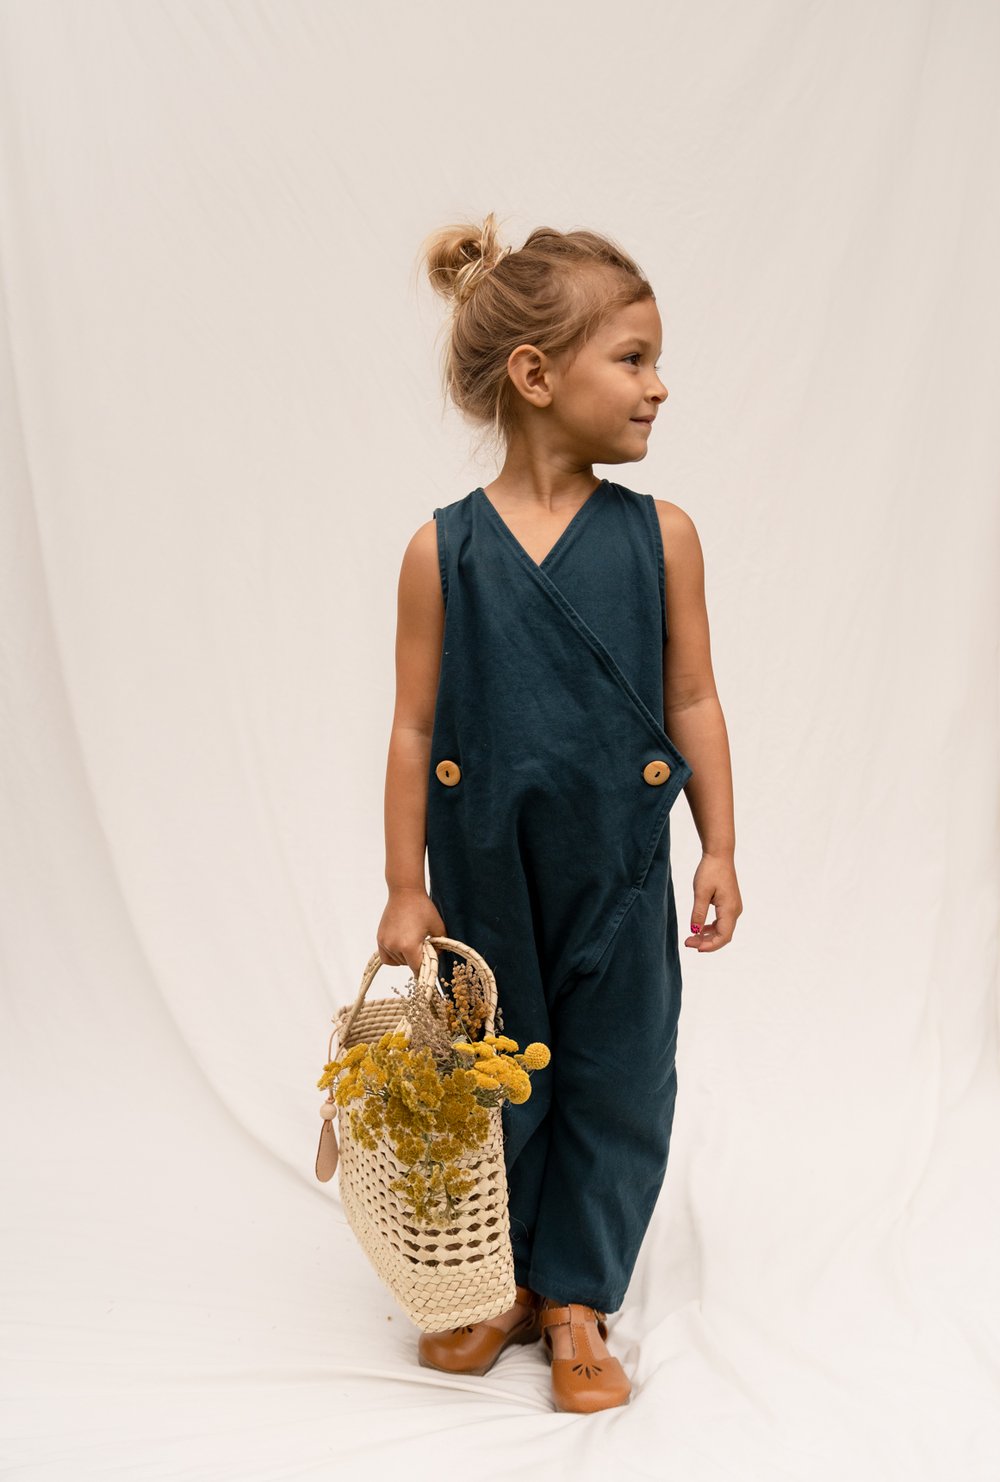 Sustainable Children's Clothing Brands That Don't Break The Bank